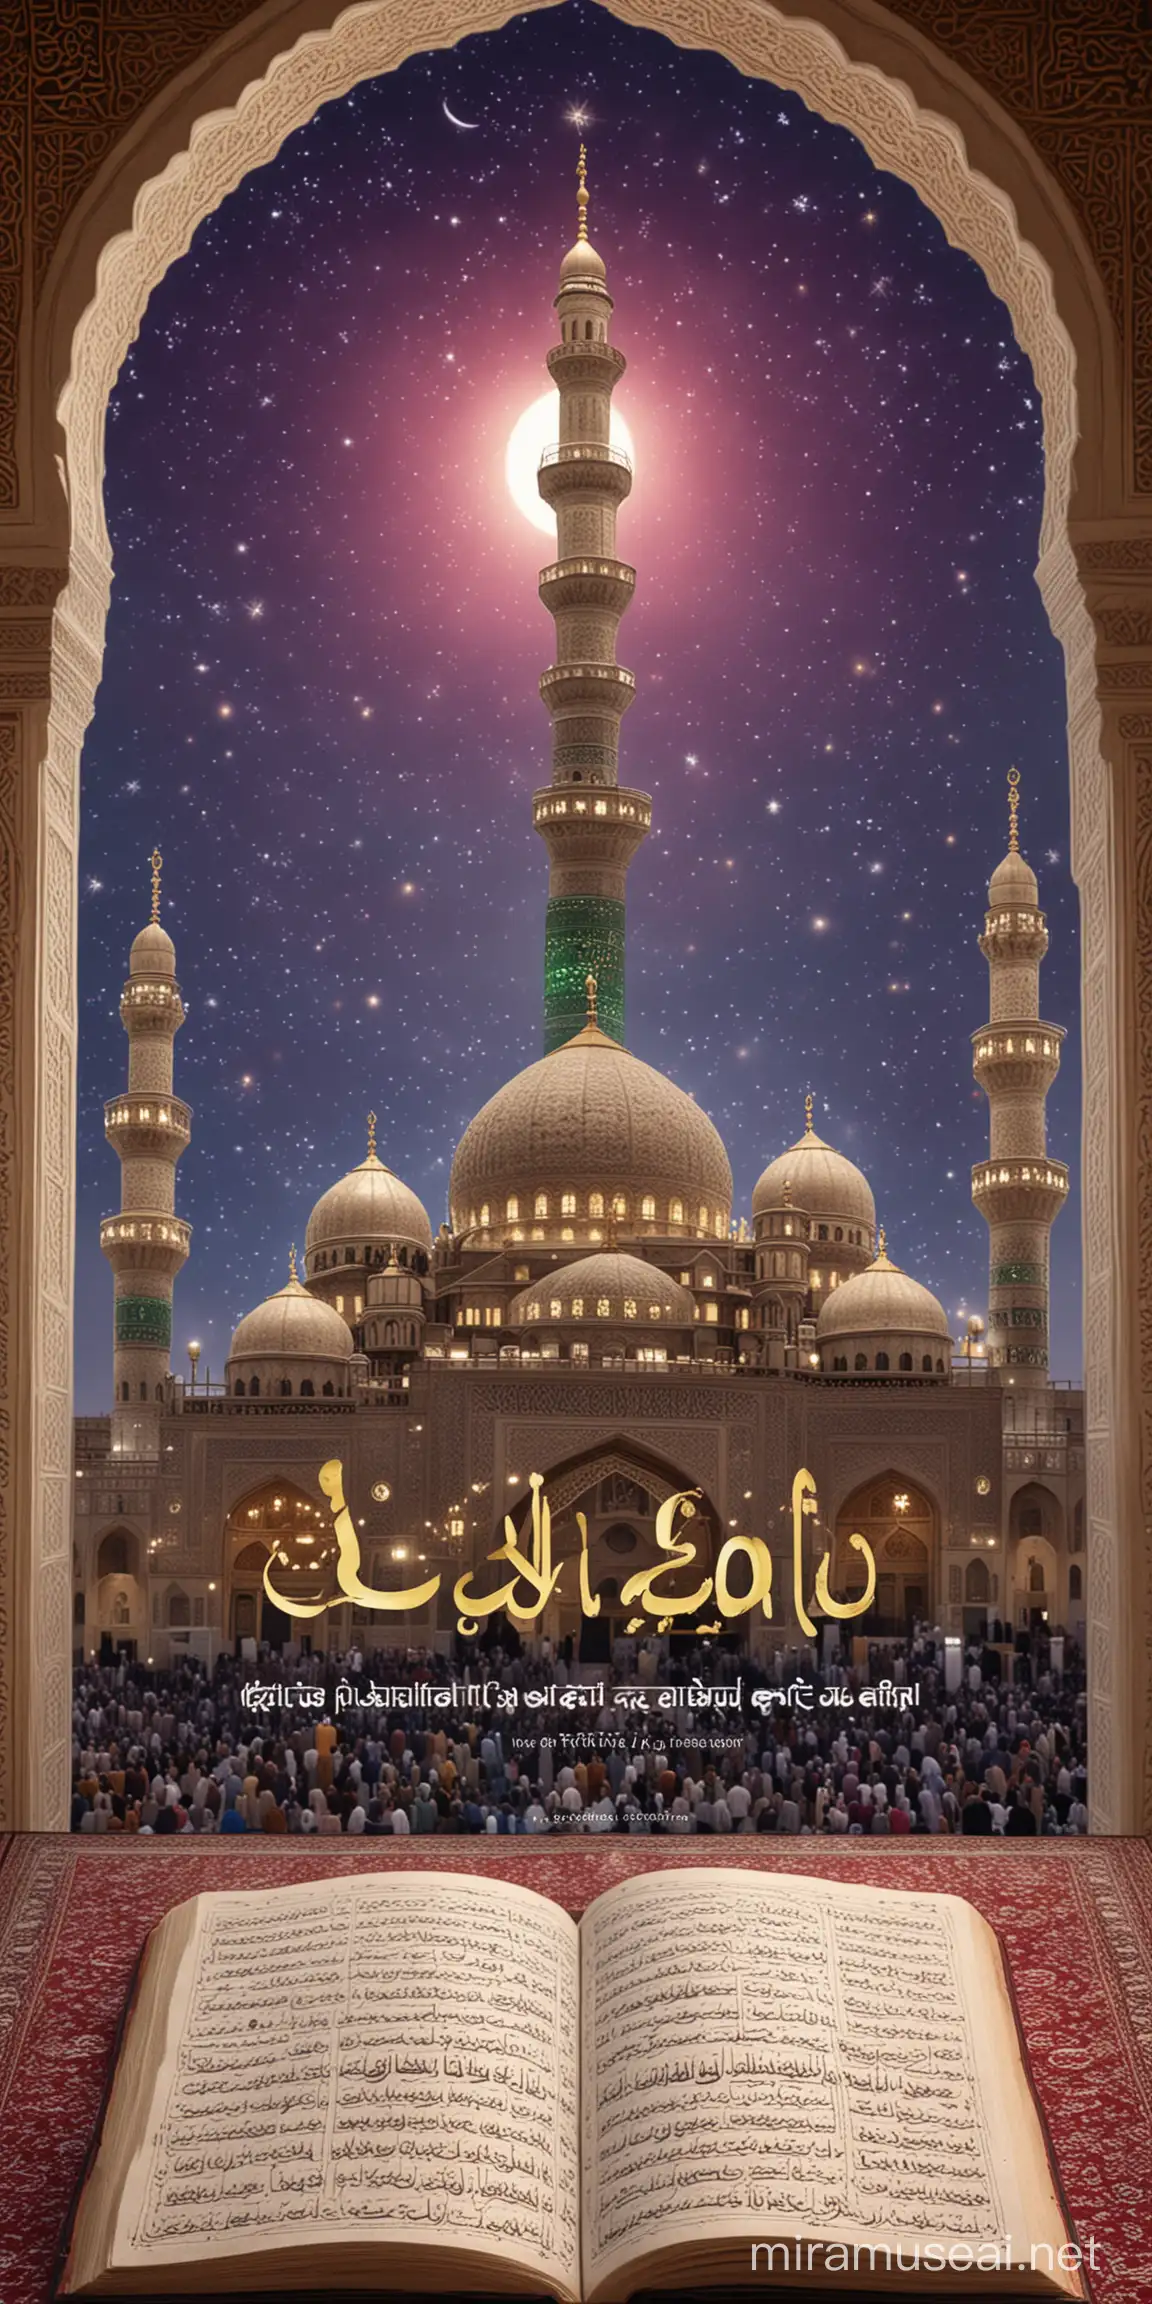 Eid Mubarak wishes with quotes from quran, background feature with Muslim holy things and places, write wishes by SUNIL in the form of a mosque 